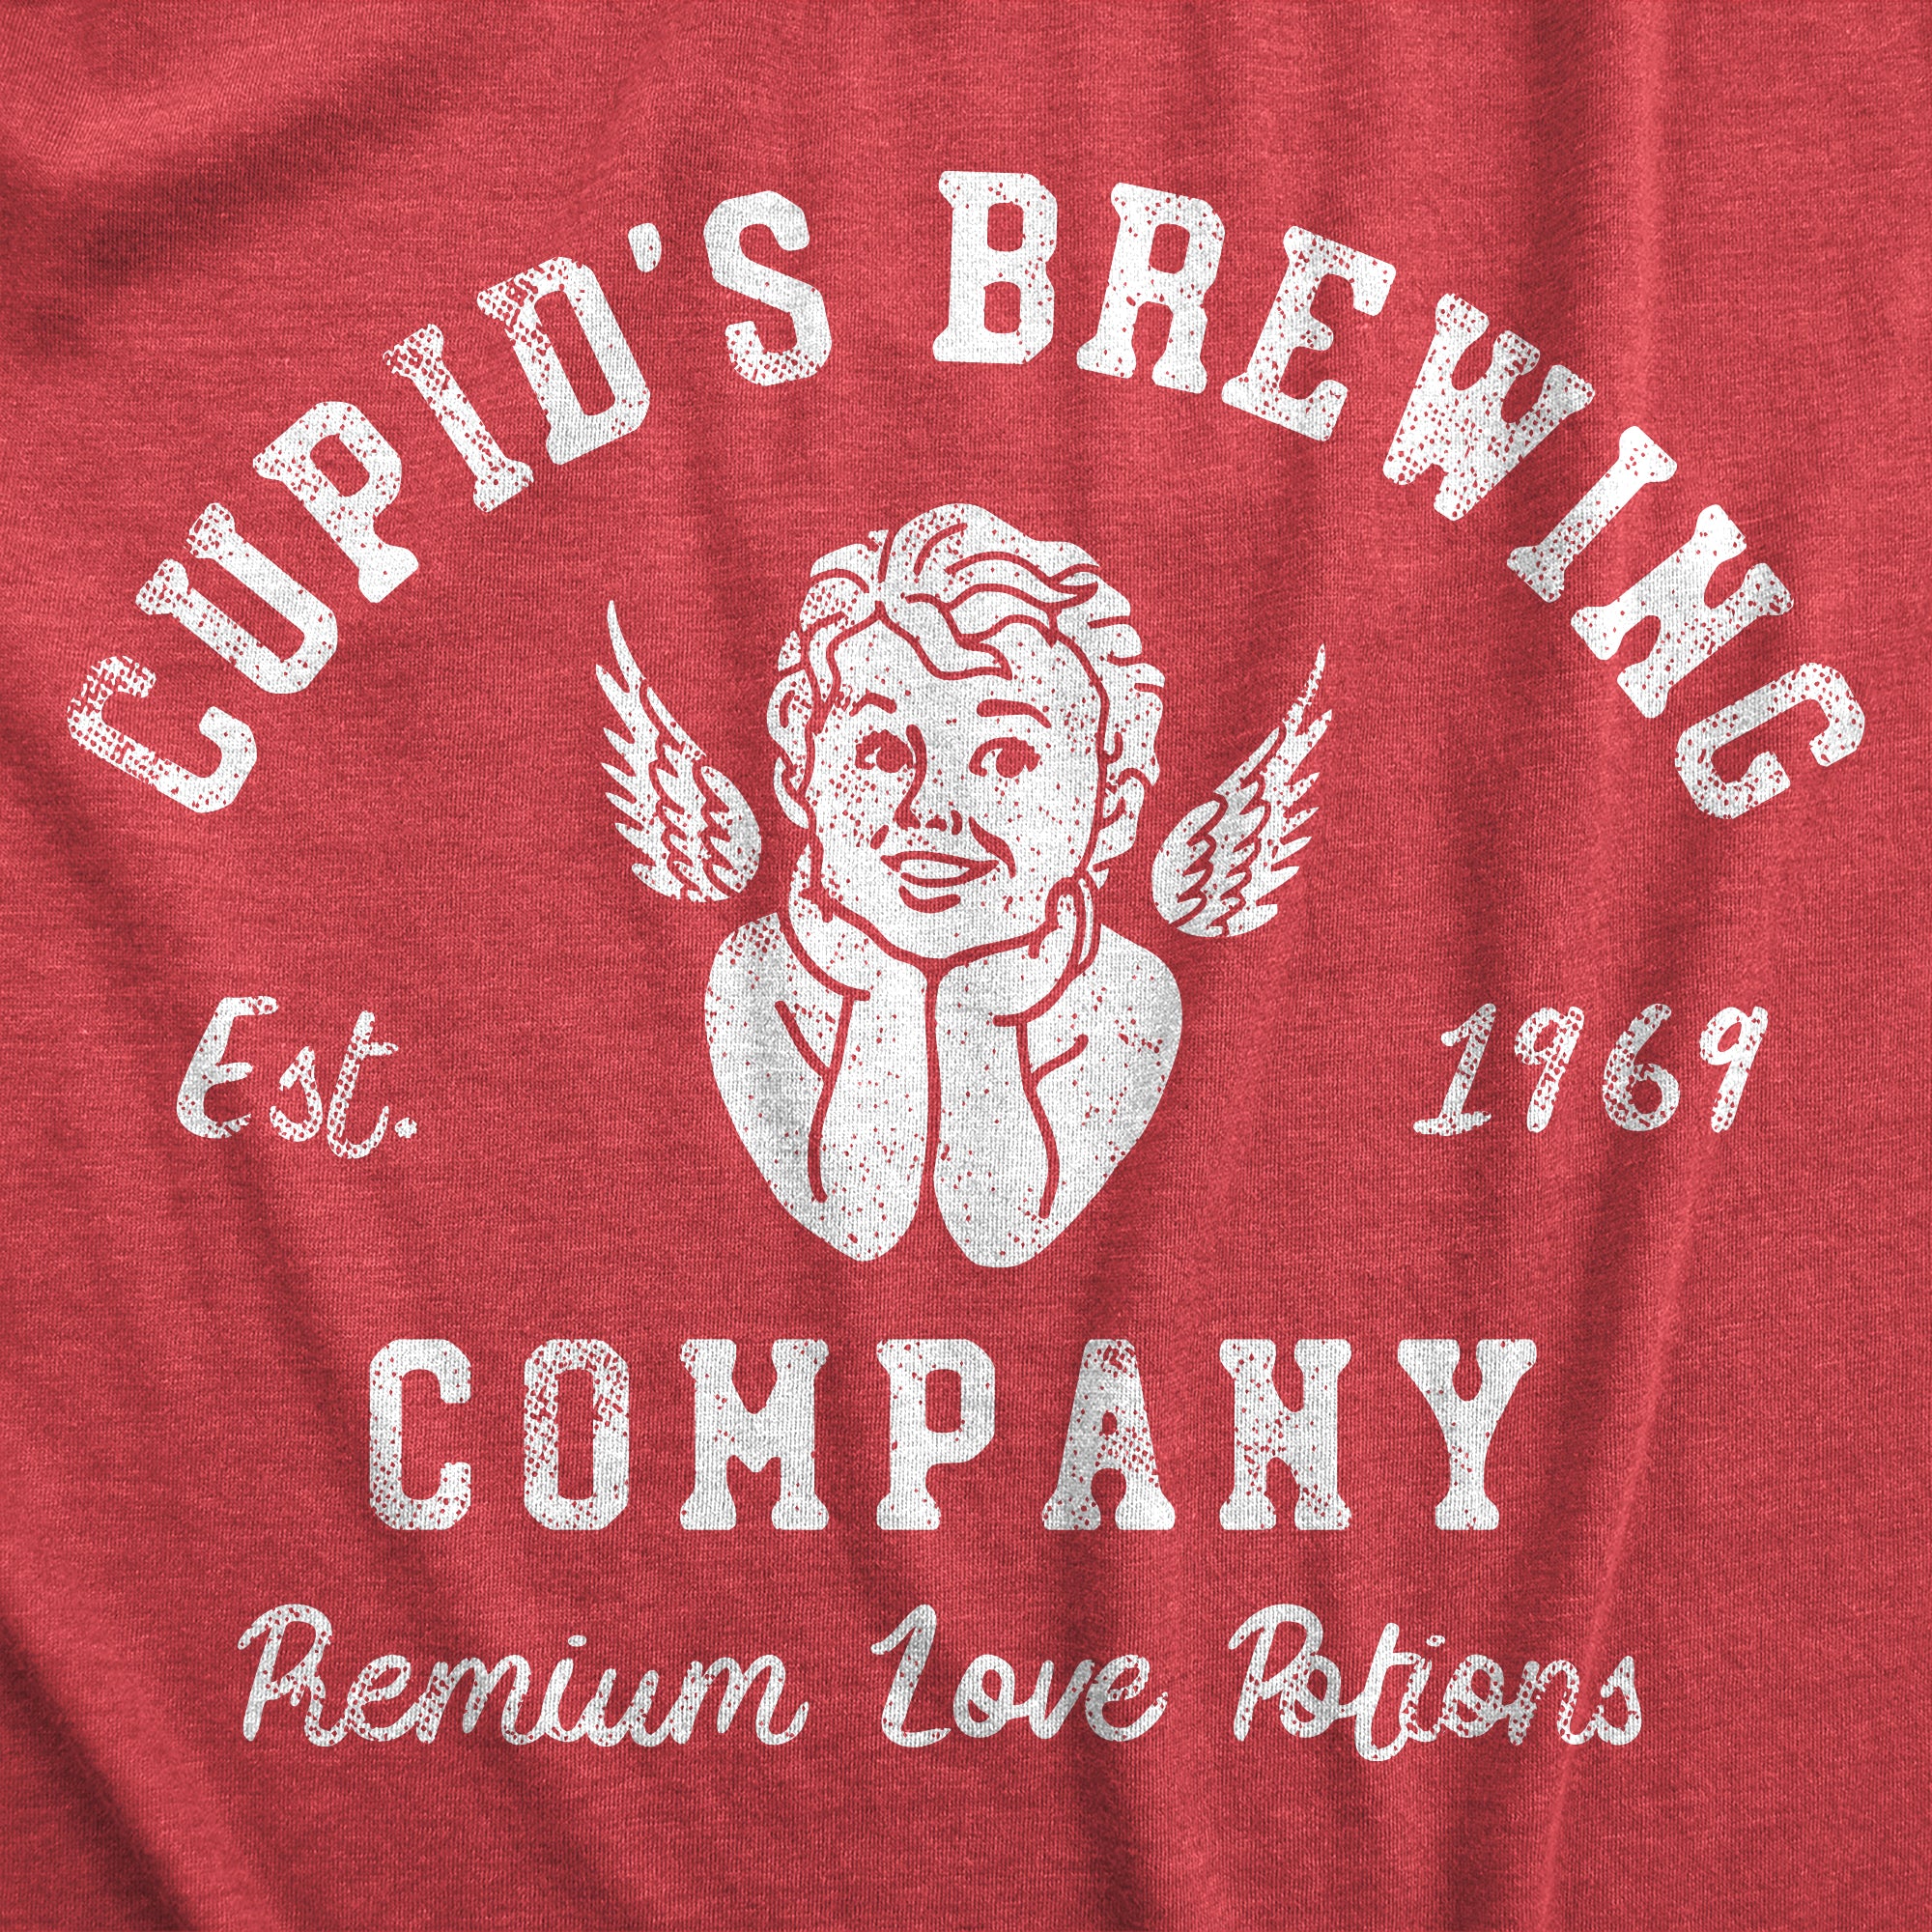 Funny Heather Red - Cupid Brewing Cupids Brewing Company Mens T Shirt Nerdy Valentine's Day Tee